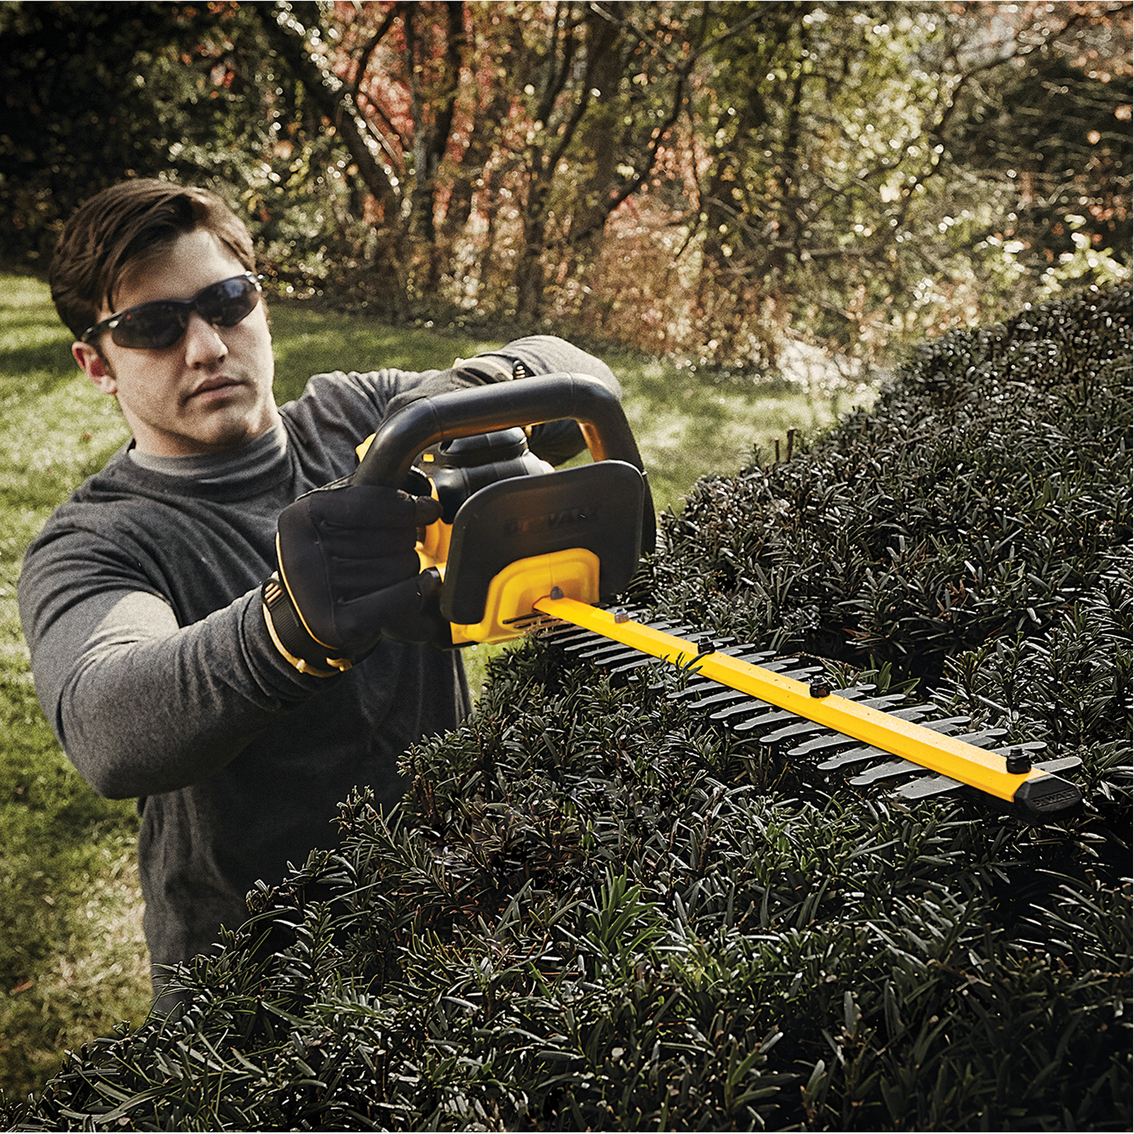 20V MAX* Lithium Ion Hedge Trimmer (5.0Ah)